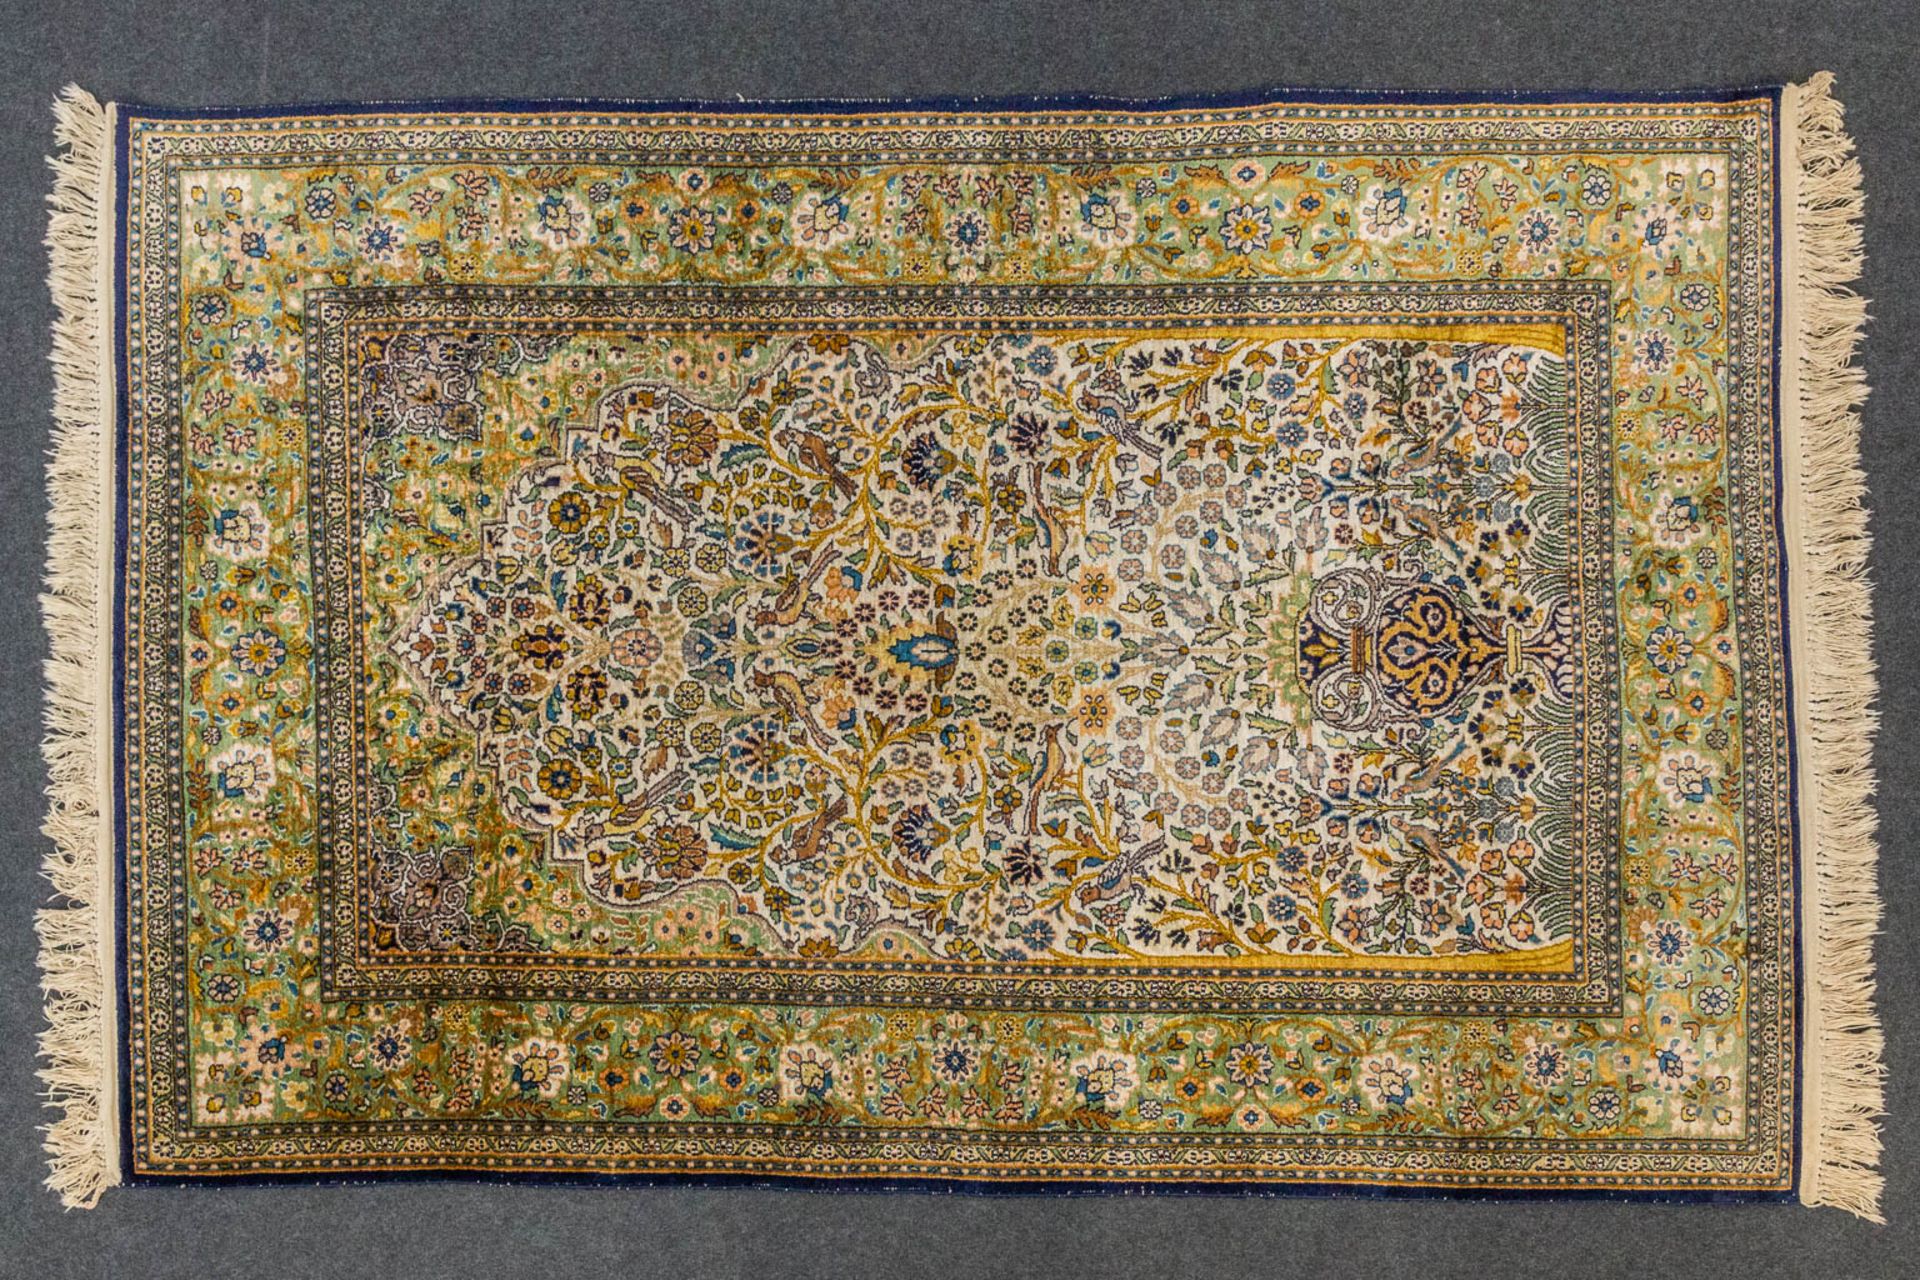 An Oriental, hand-made carpet, 'Isfahan' 181 x 124 - Image 4 of 7